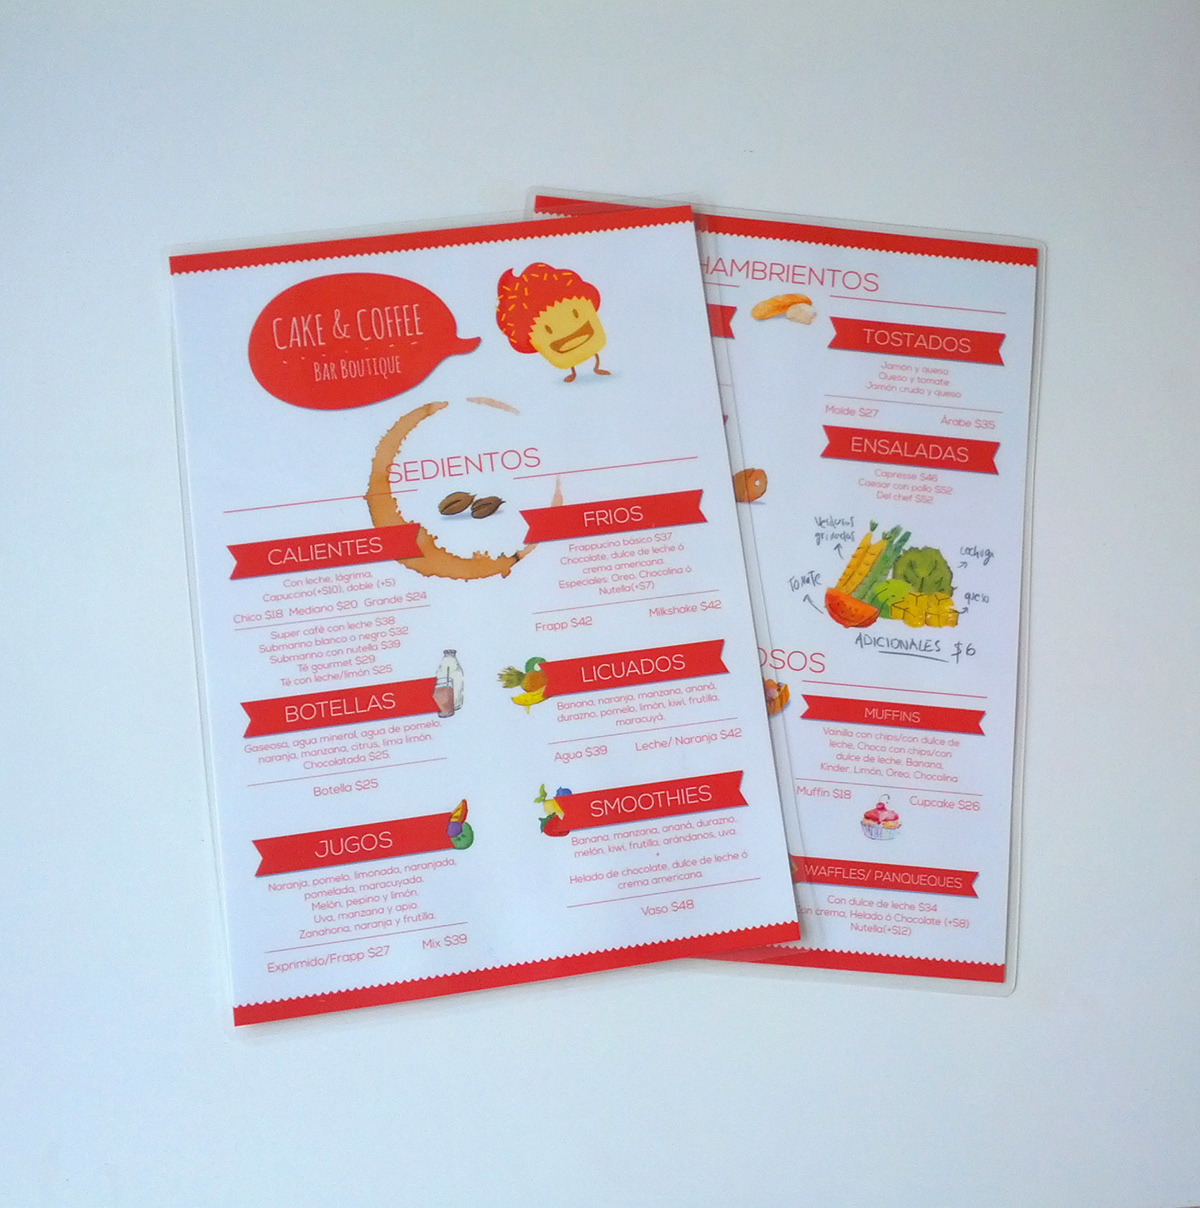 cakeandcoffee bar personal menu cards business Coffee shop chocolate muffins